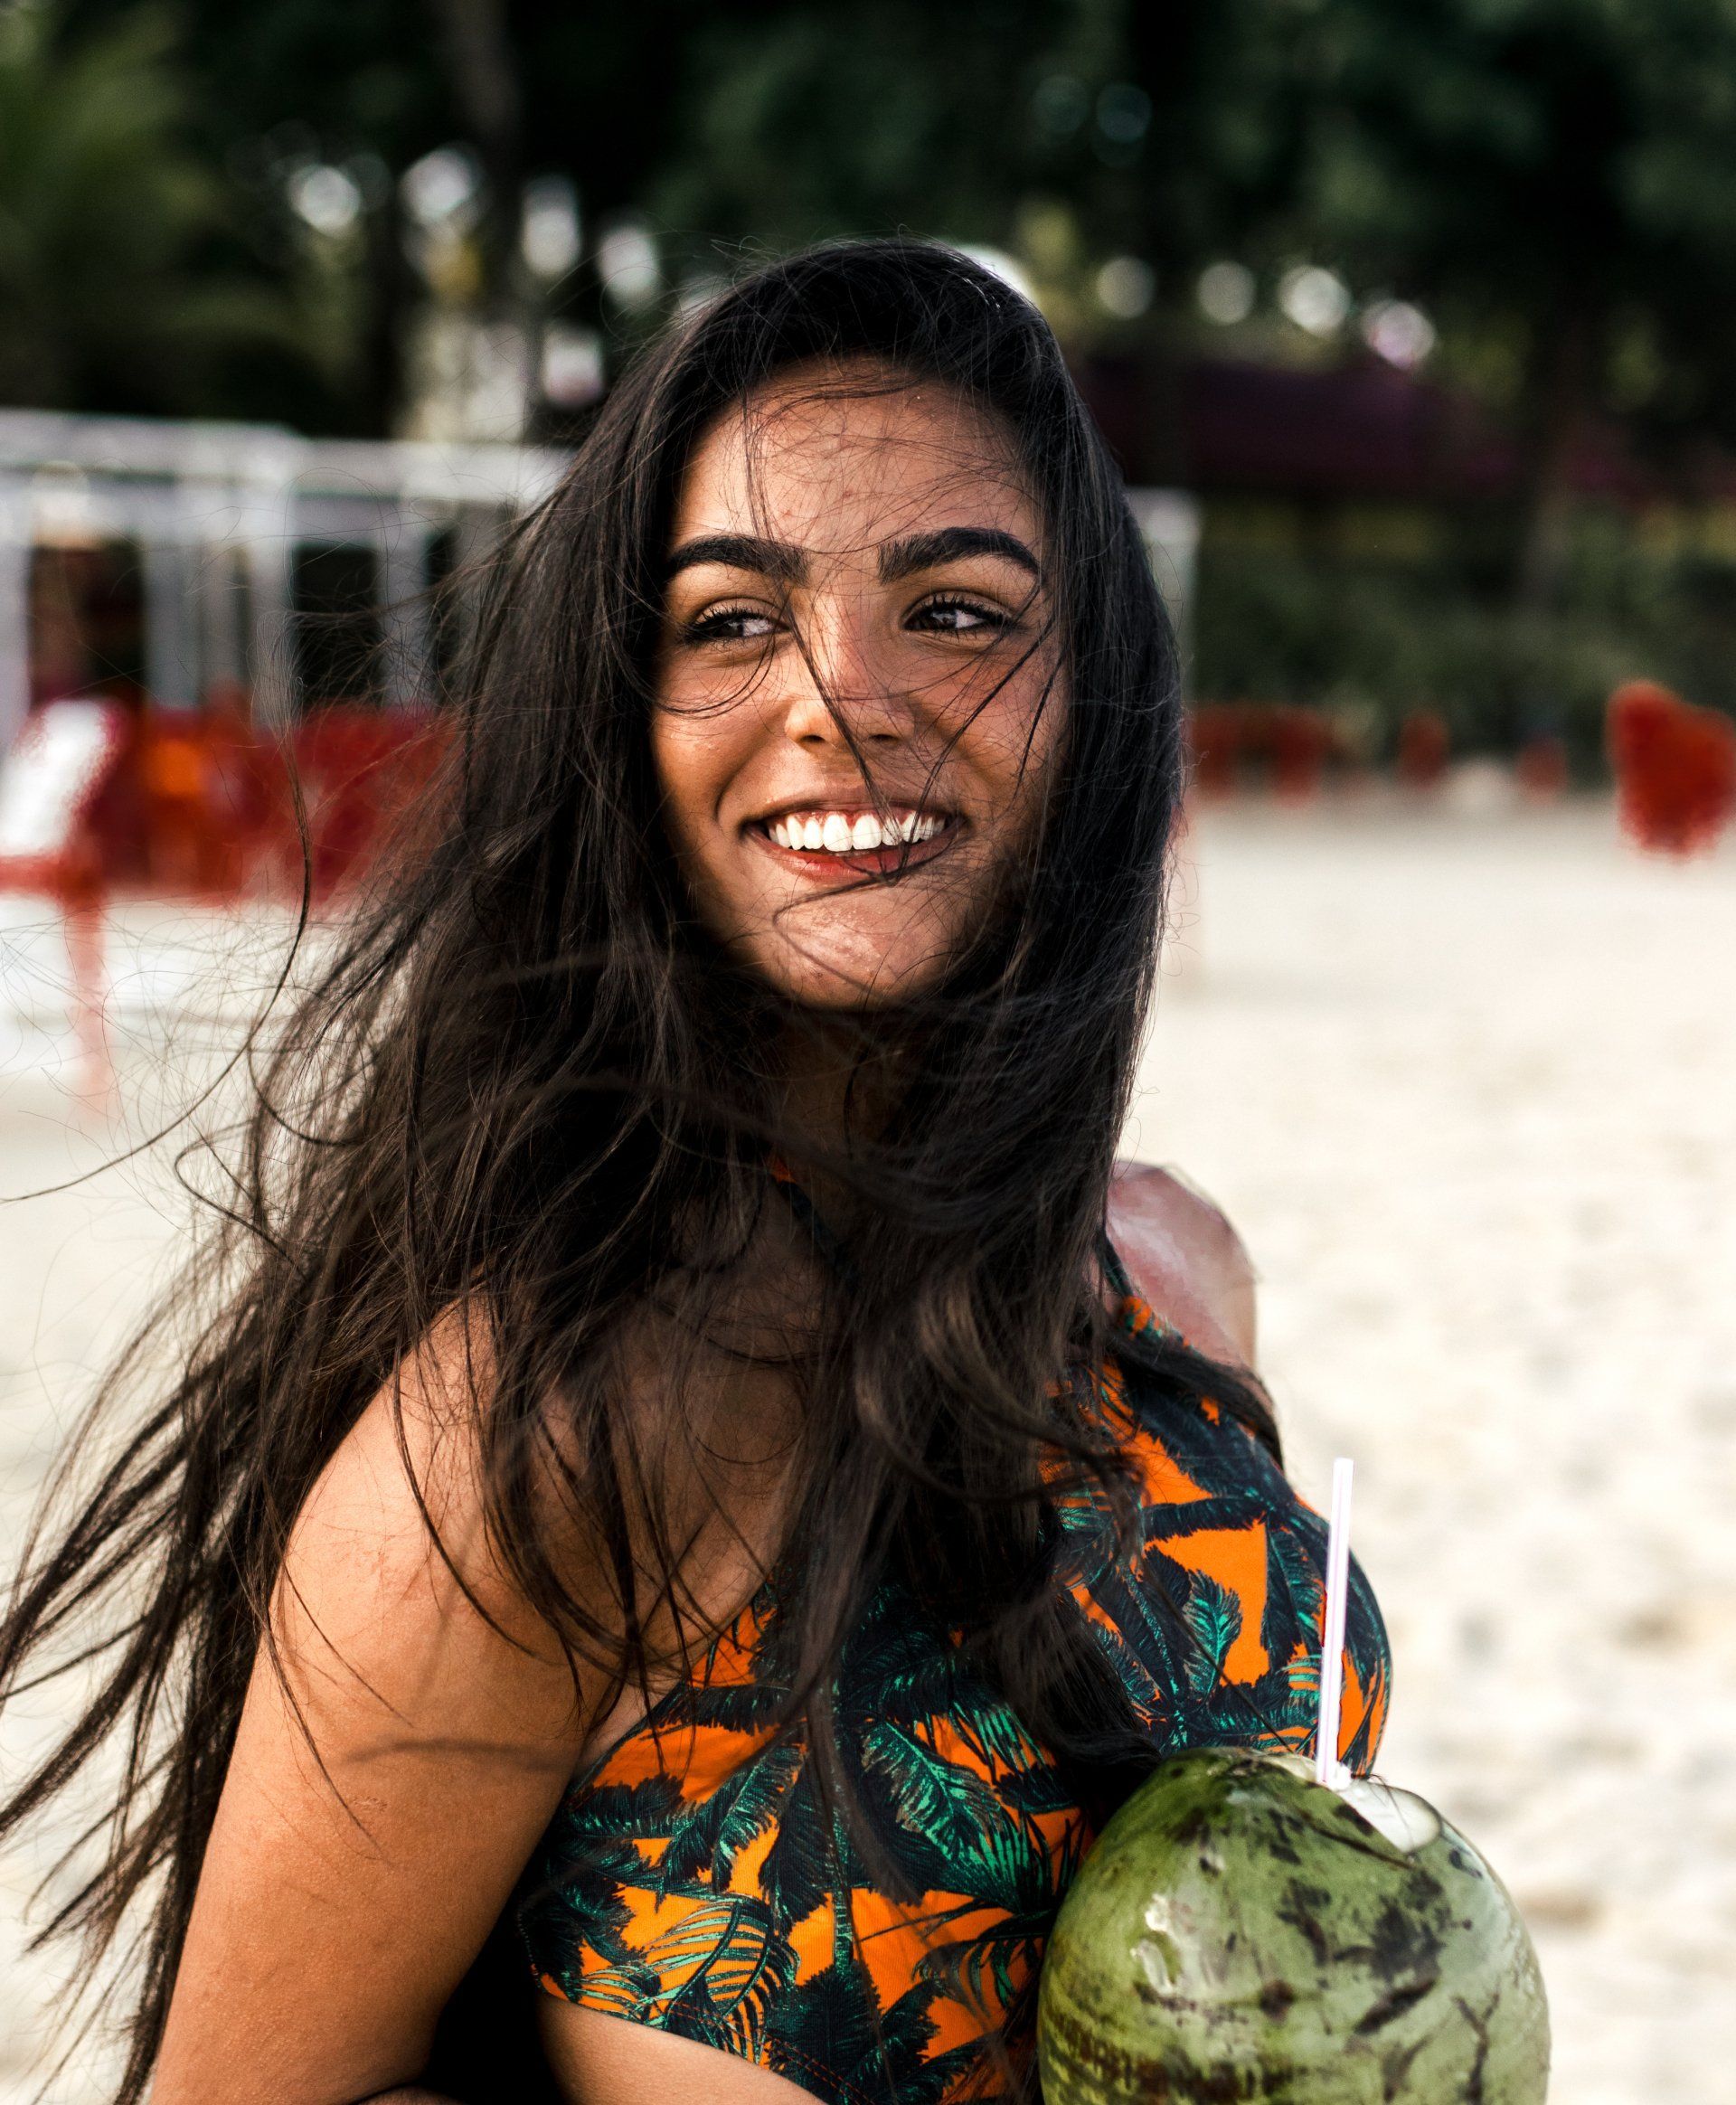 A woman in a bikini is holding a coconut on the beach and smiling.